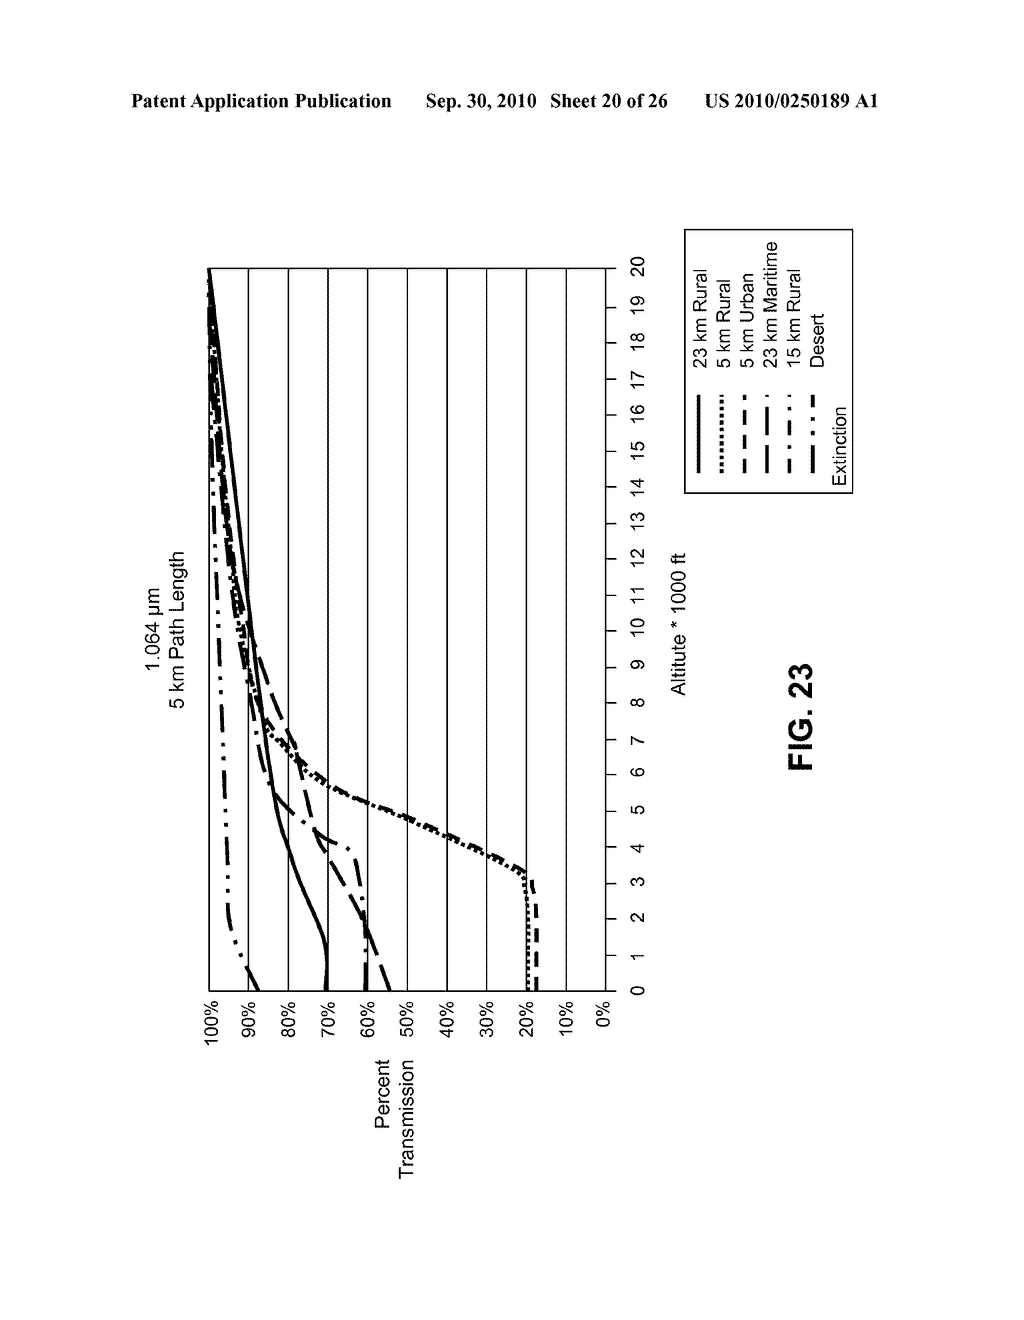 Method and System for Determination of Detection Probability or a Target Object Based on a Range - diagram, schematic, and image 21